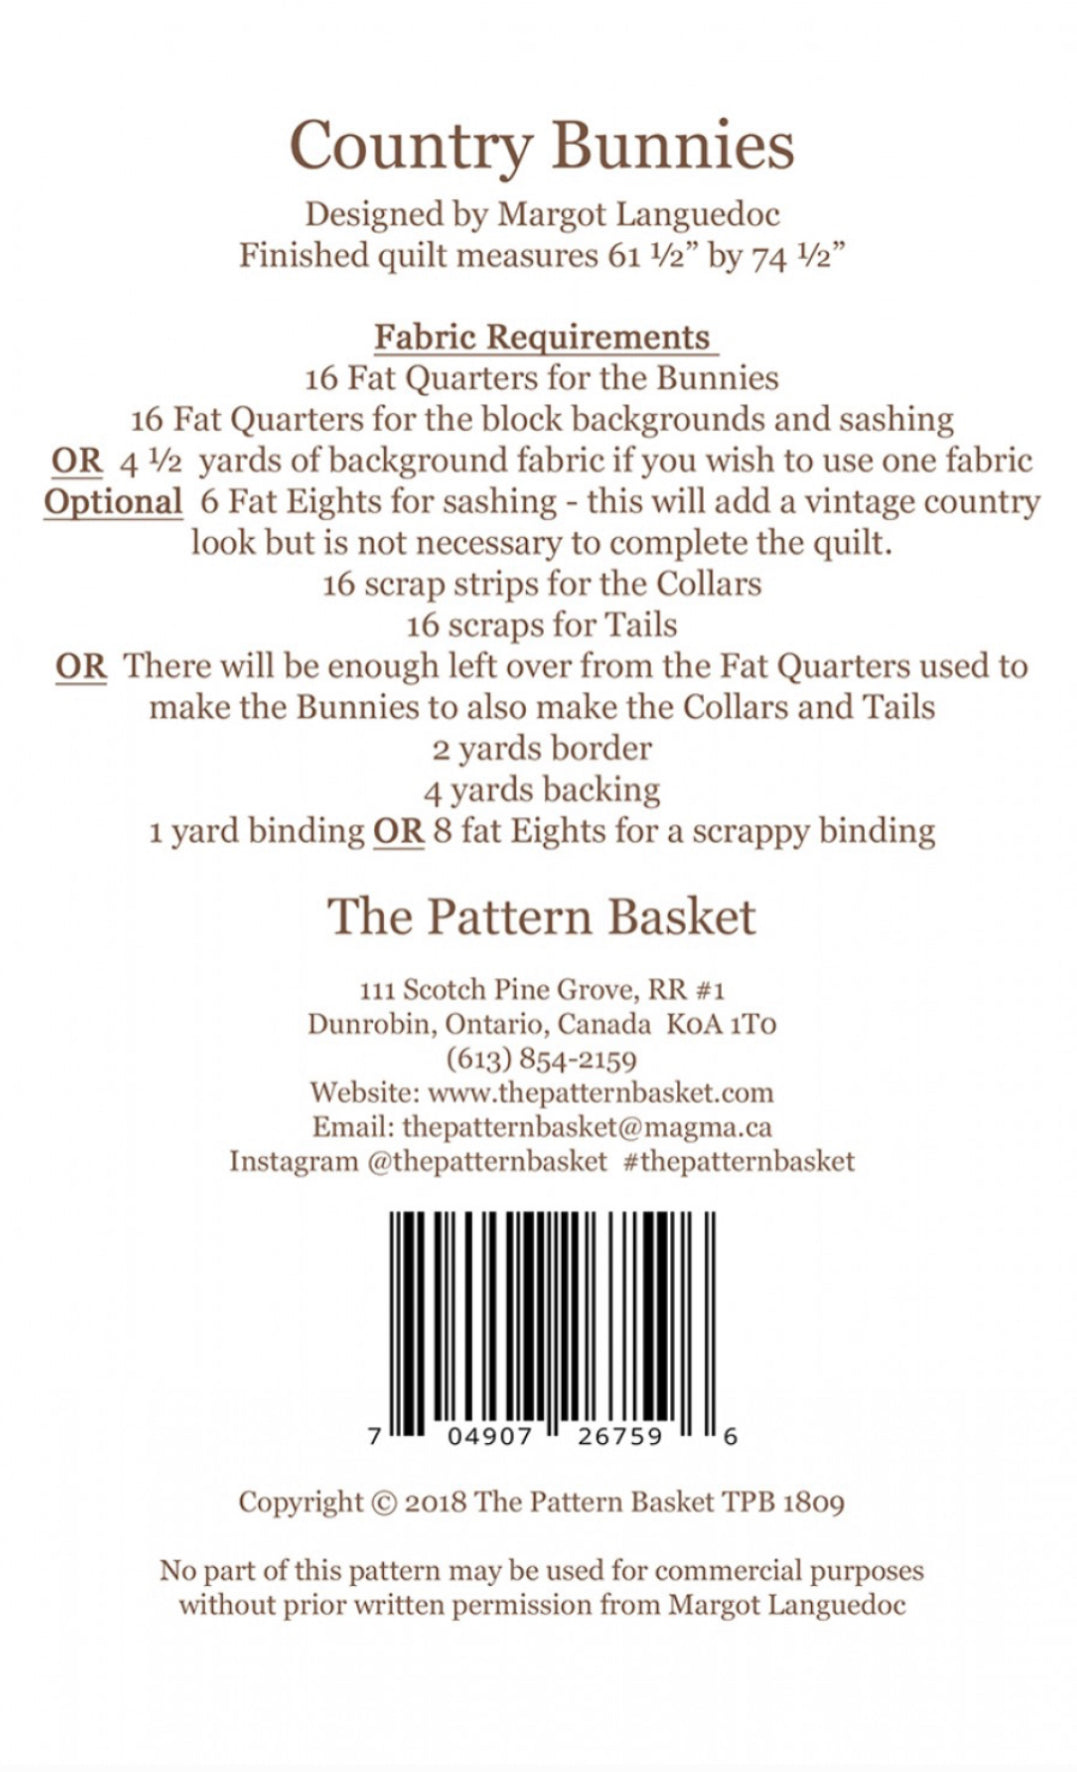 Country Bunnies Quilt Pattern - The Pattern Basket